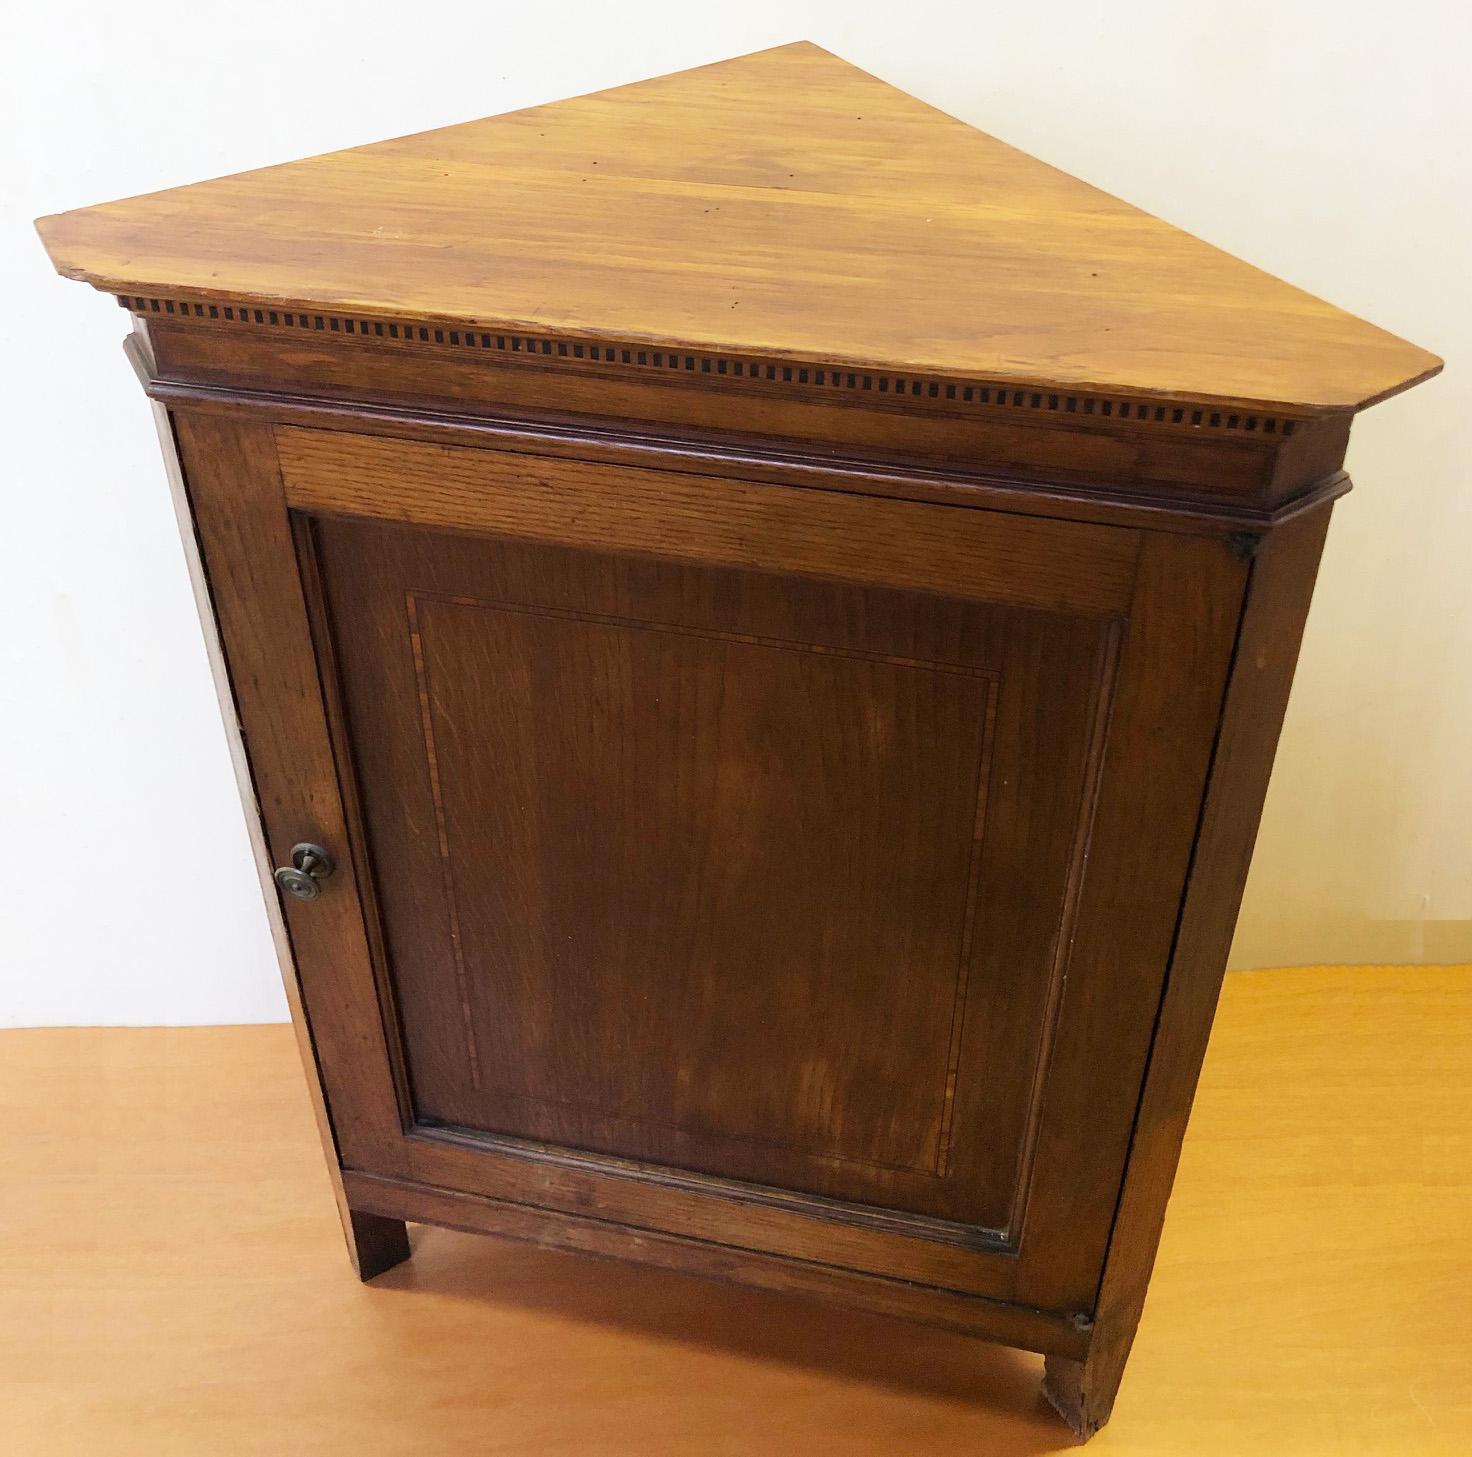 Country Original Italian Corner Cupboard from 1930 in Oak with Honey-Colored Inlays